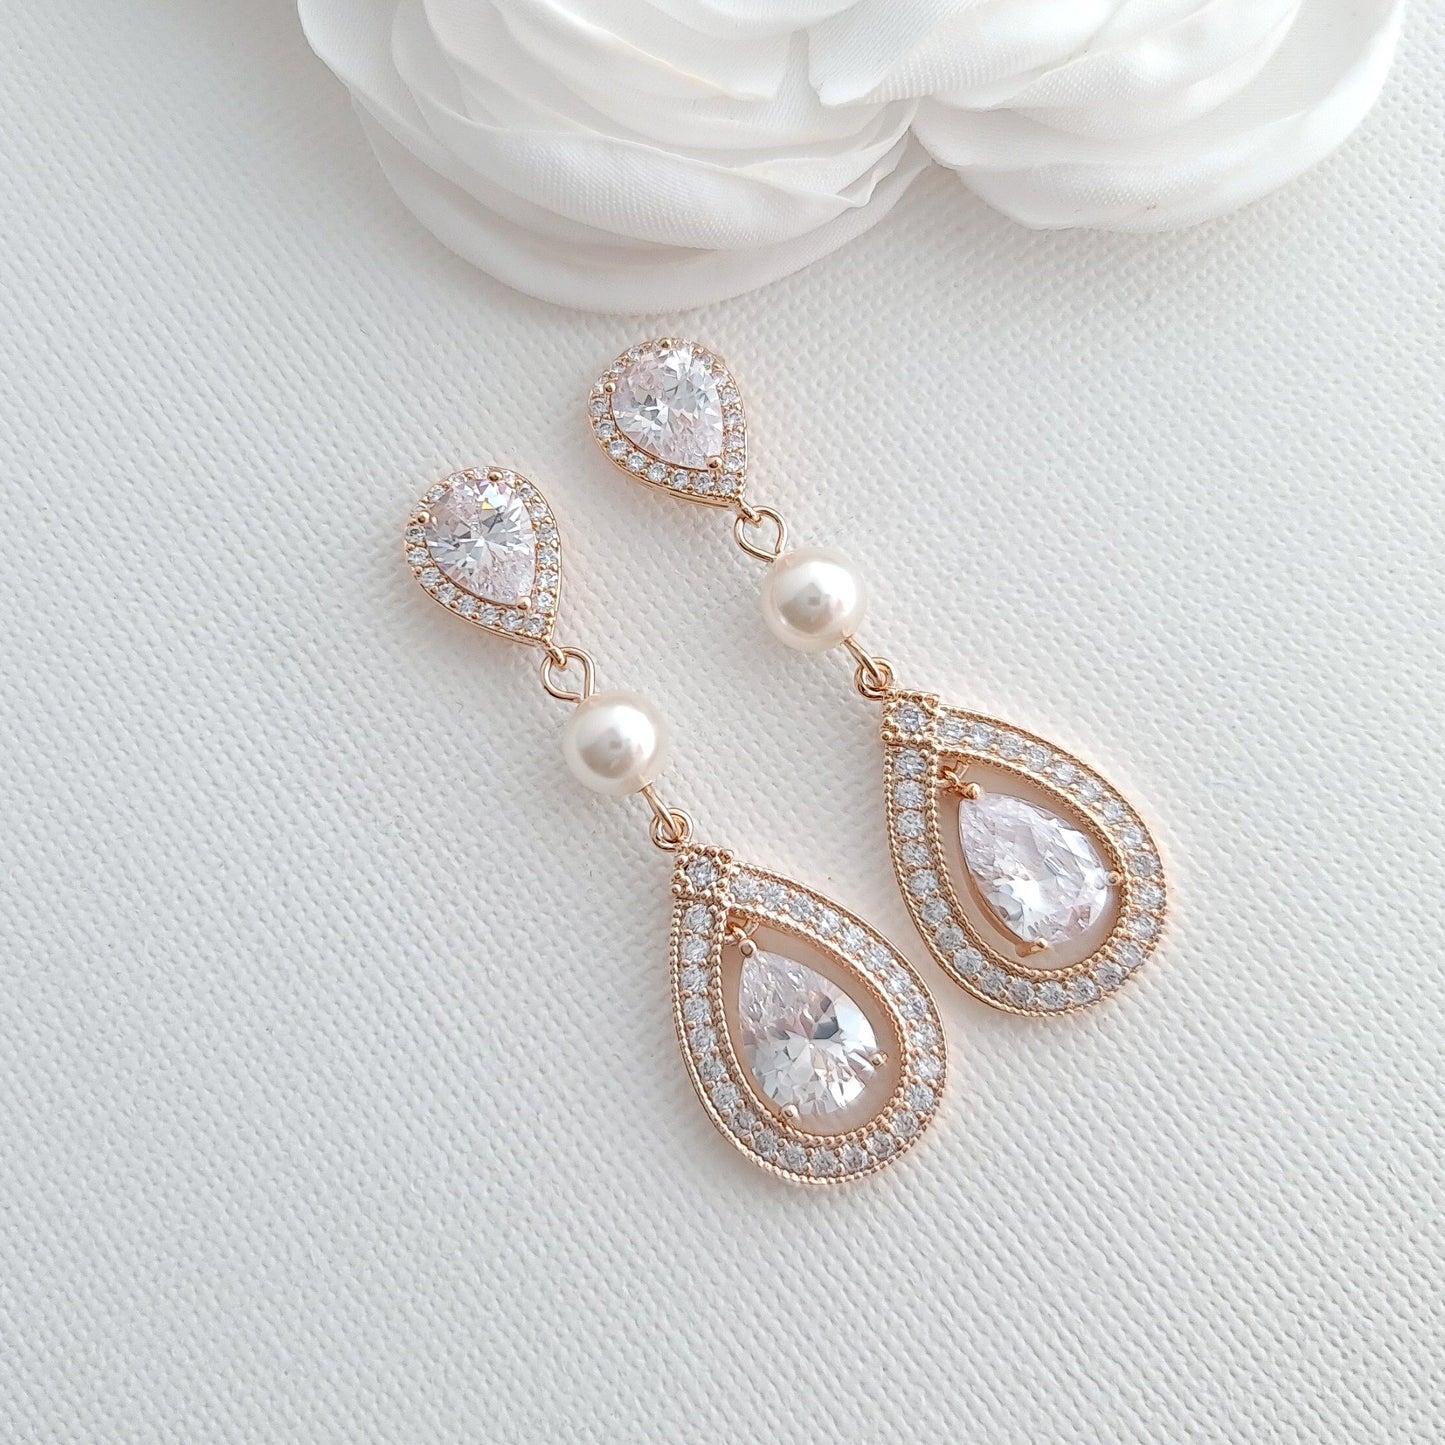 Bridal Necklace and Earring Set-Sarah - PoetryDesigns